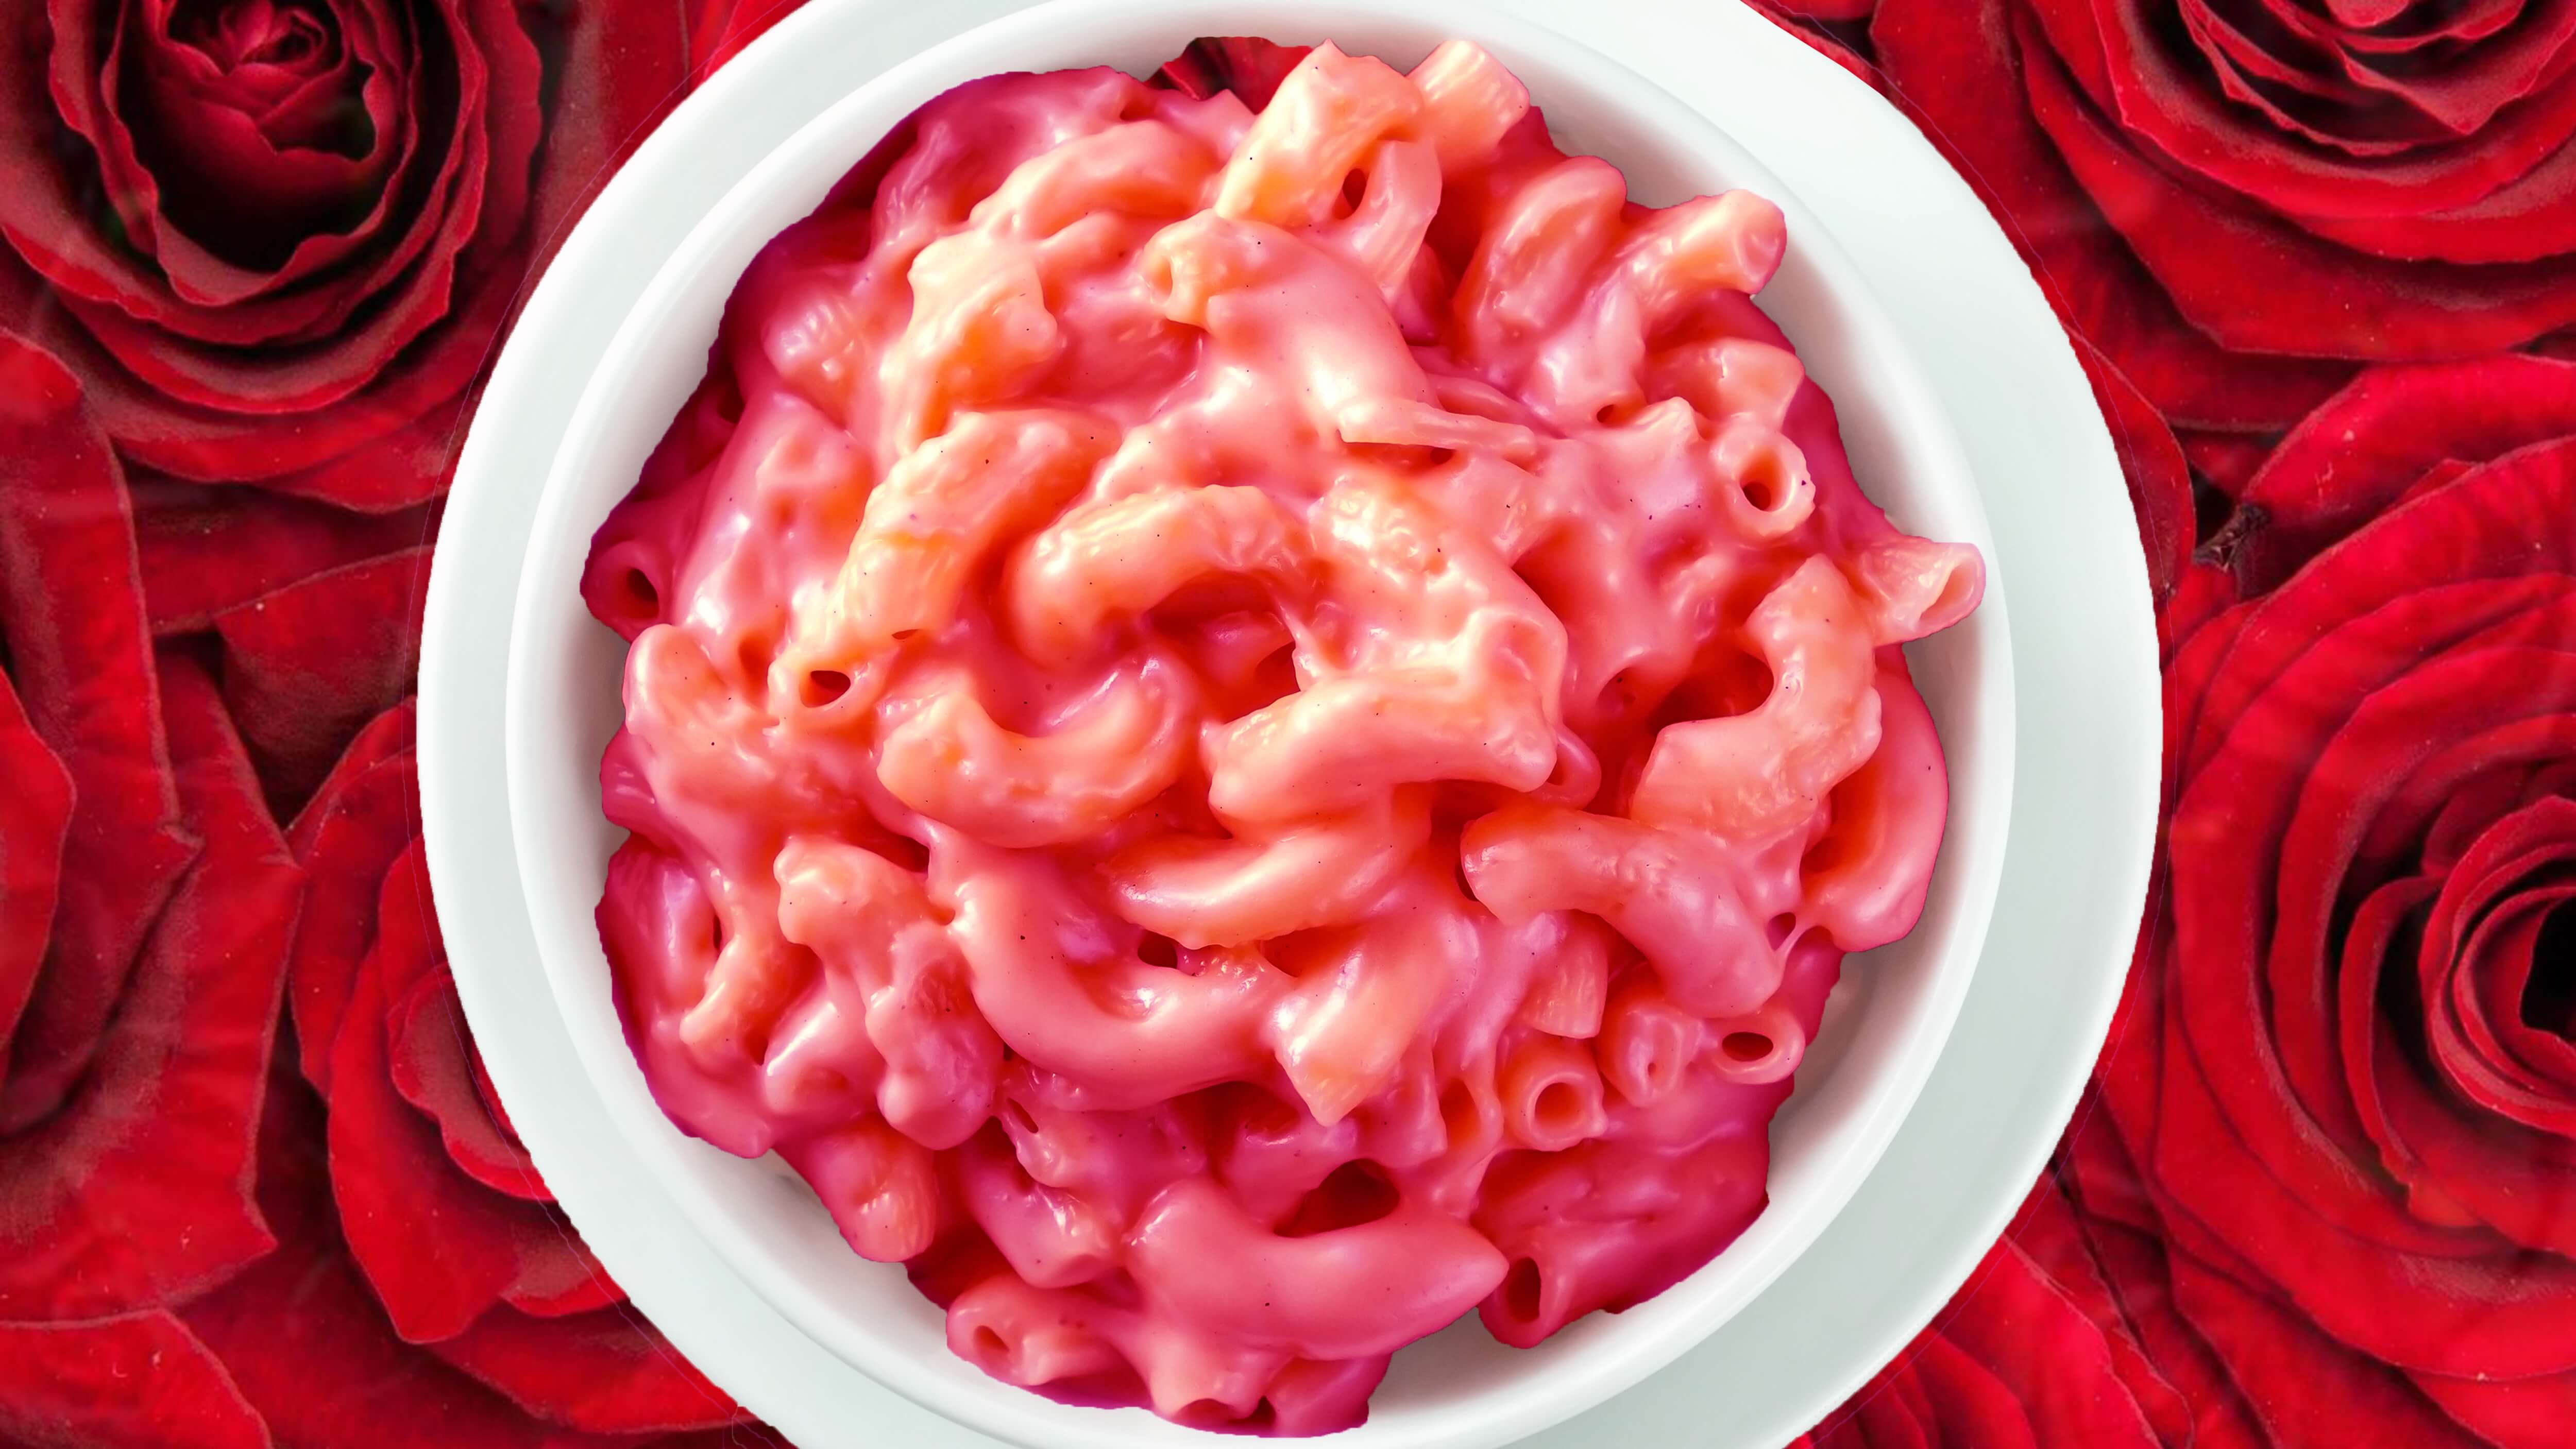 Toronto Restaurant Launches Pink Vegan Mac and Cheese for Valentine's Day